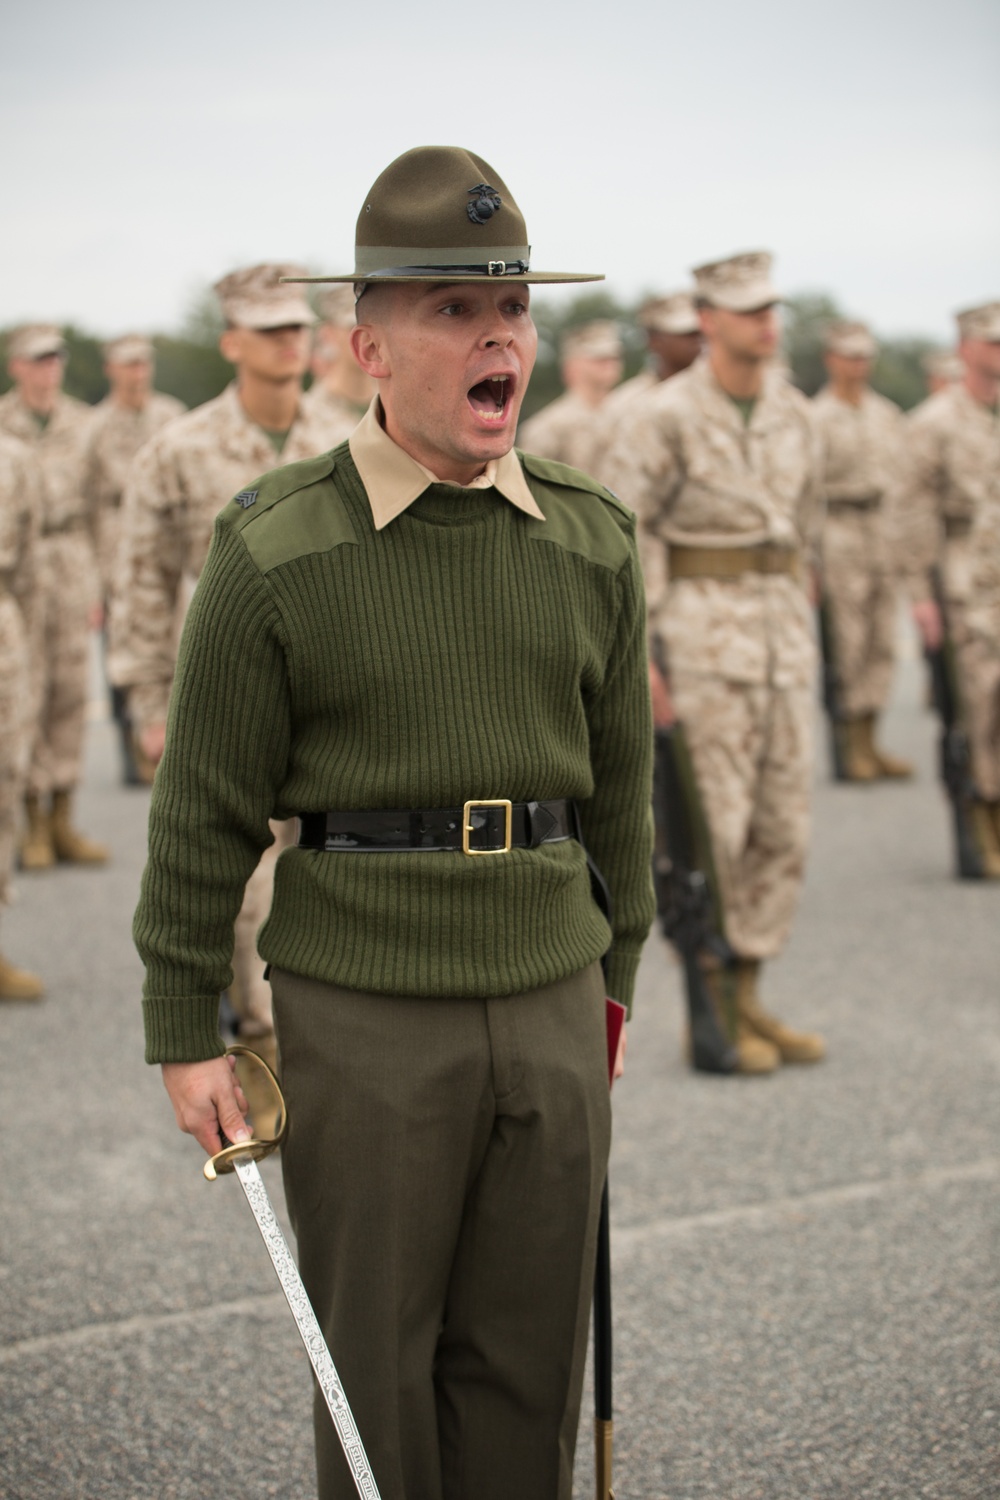 West Palm Beach, Fla., native a Marine Corps drill instructor on Parris Island